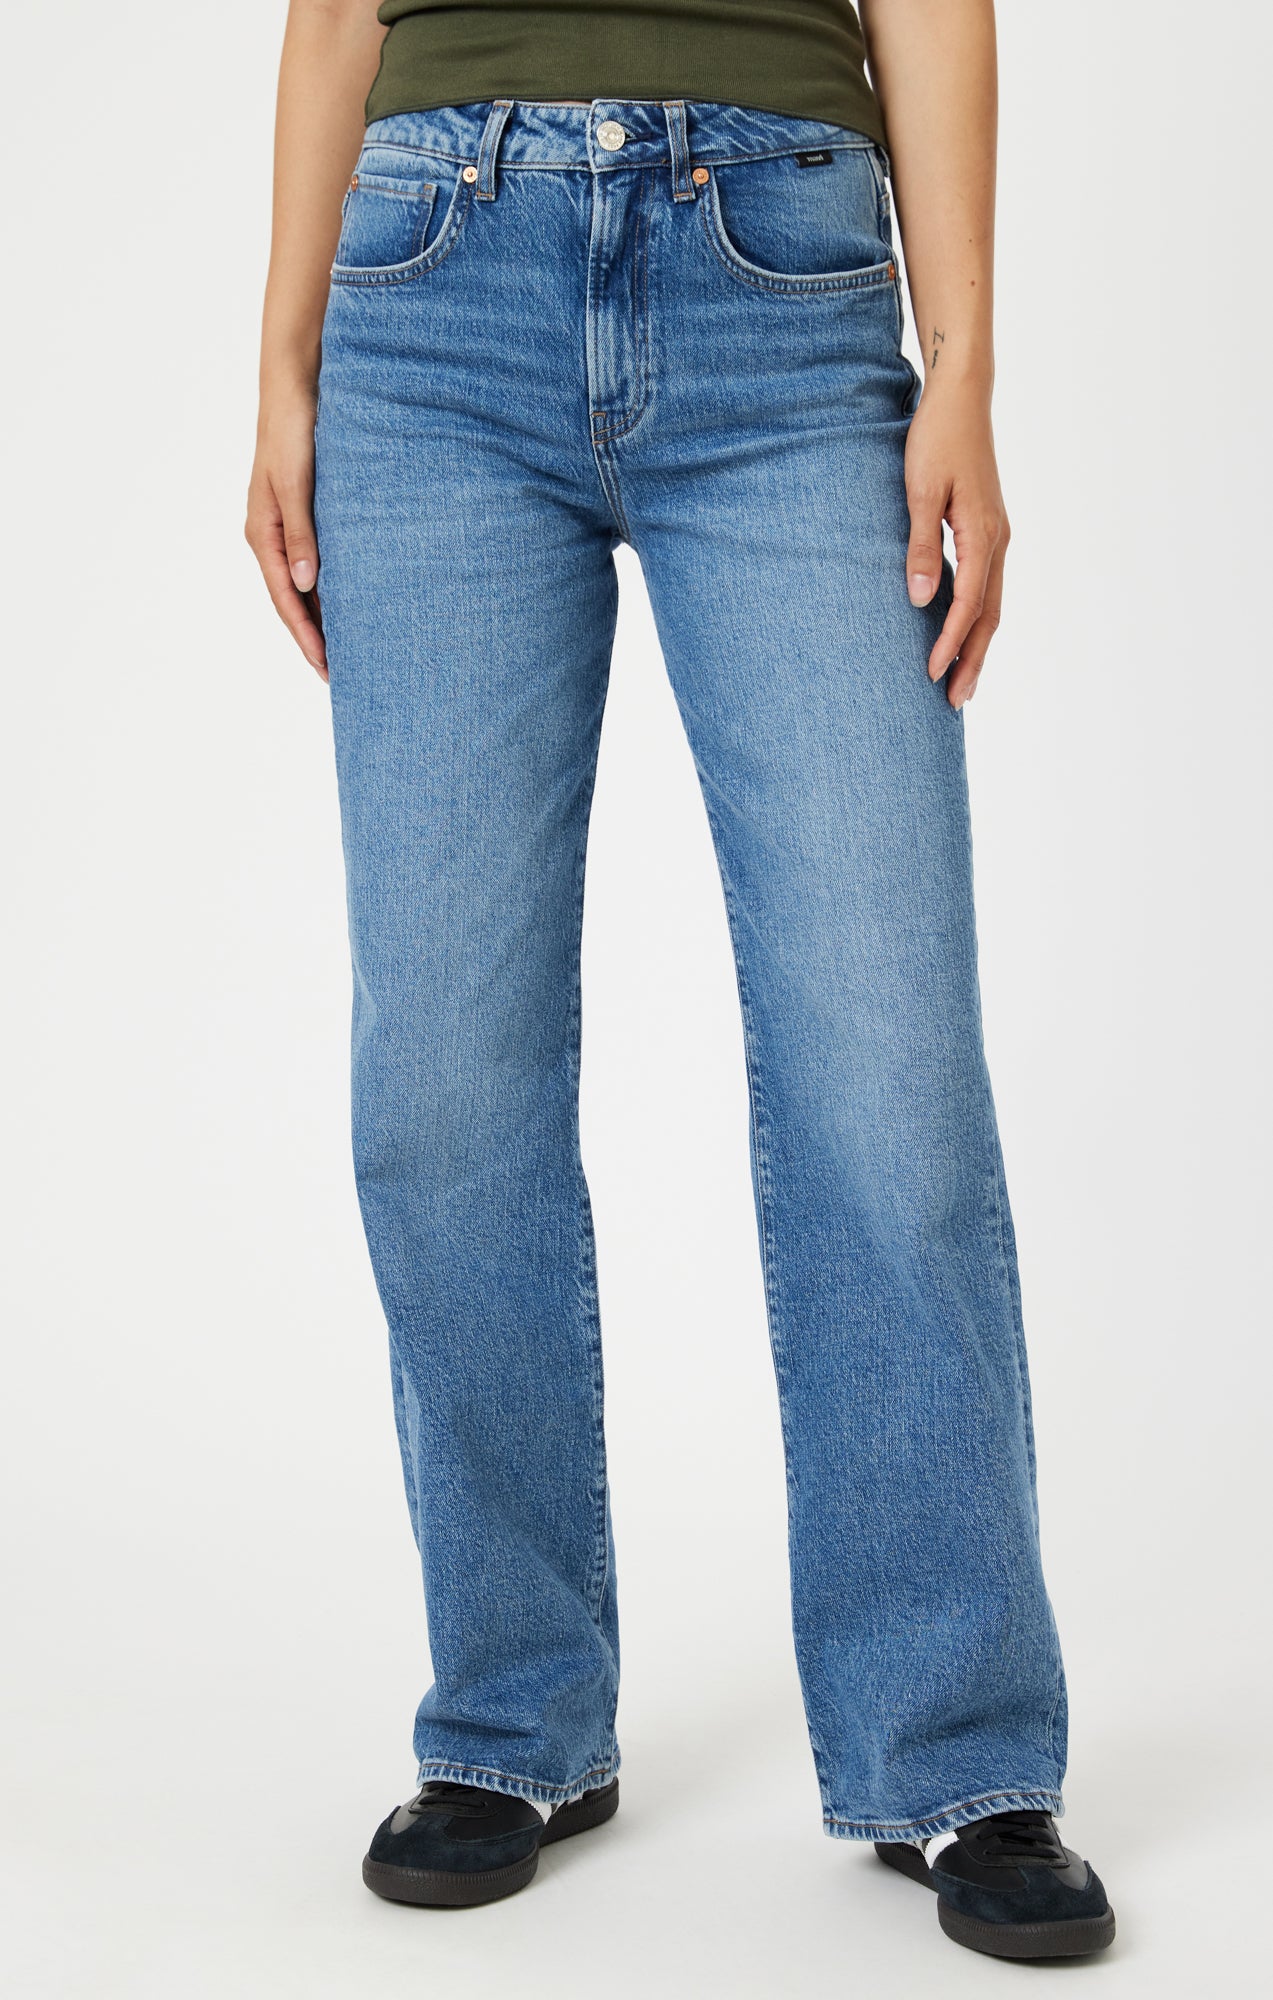 Parchment Super High Rise Jean - Women's Relaxed Jeans